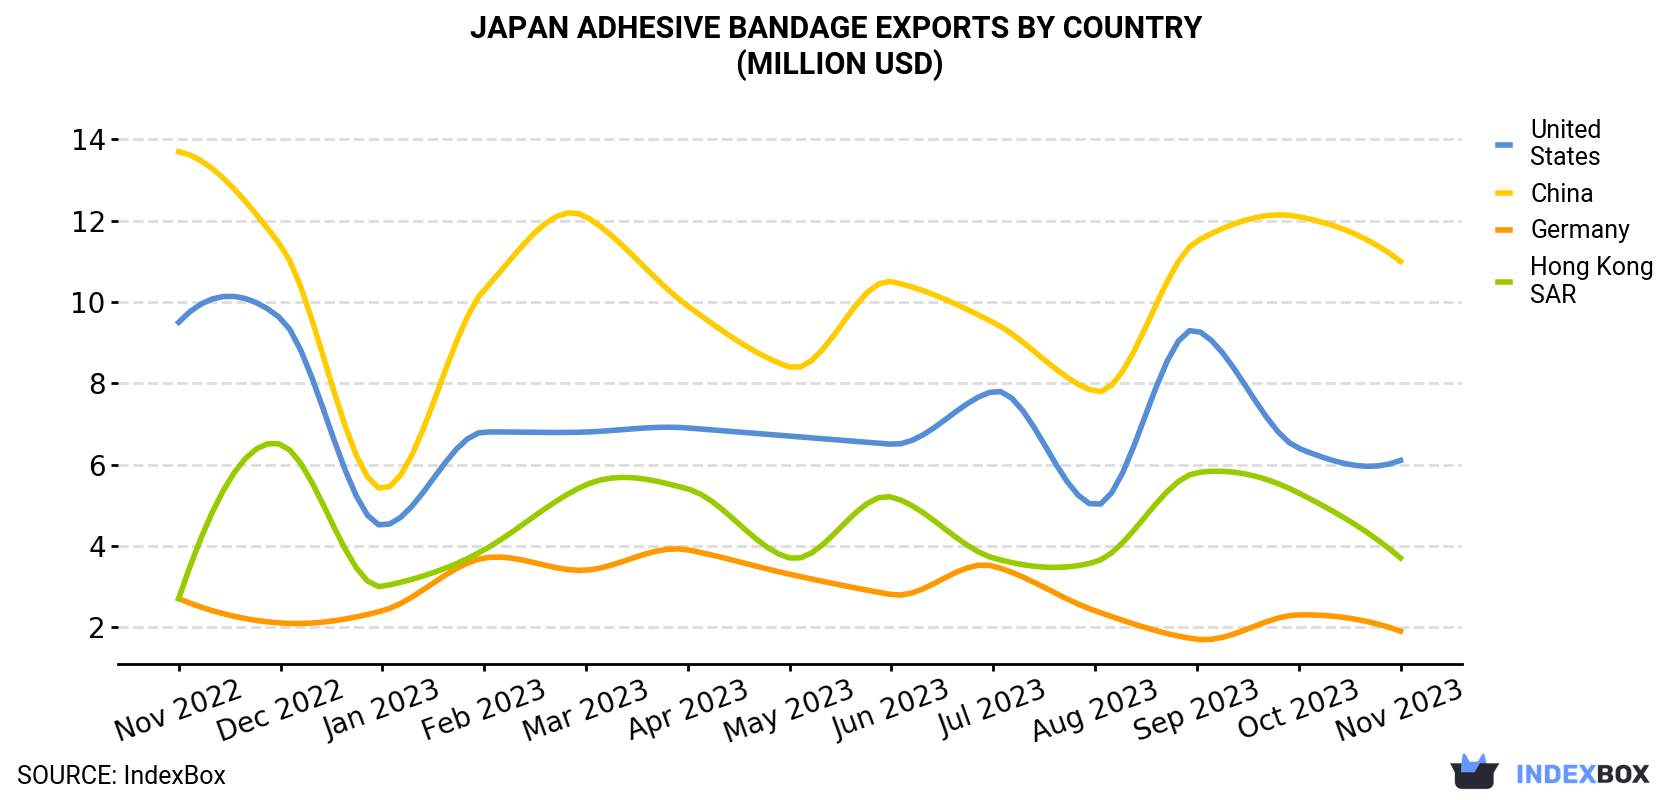 Japan Adhesive Bandage Exports By Country (Million USD)